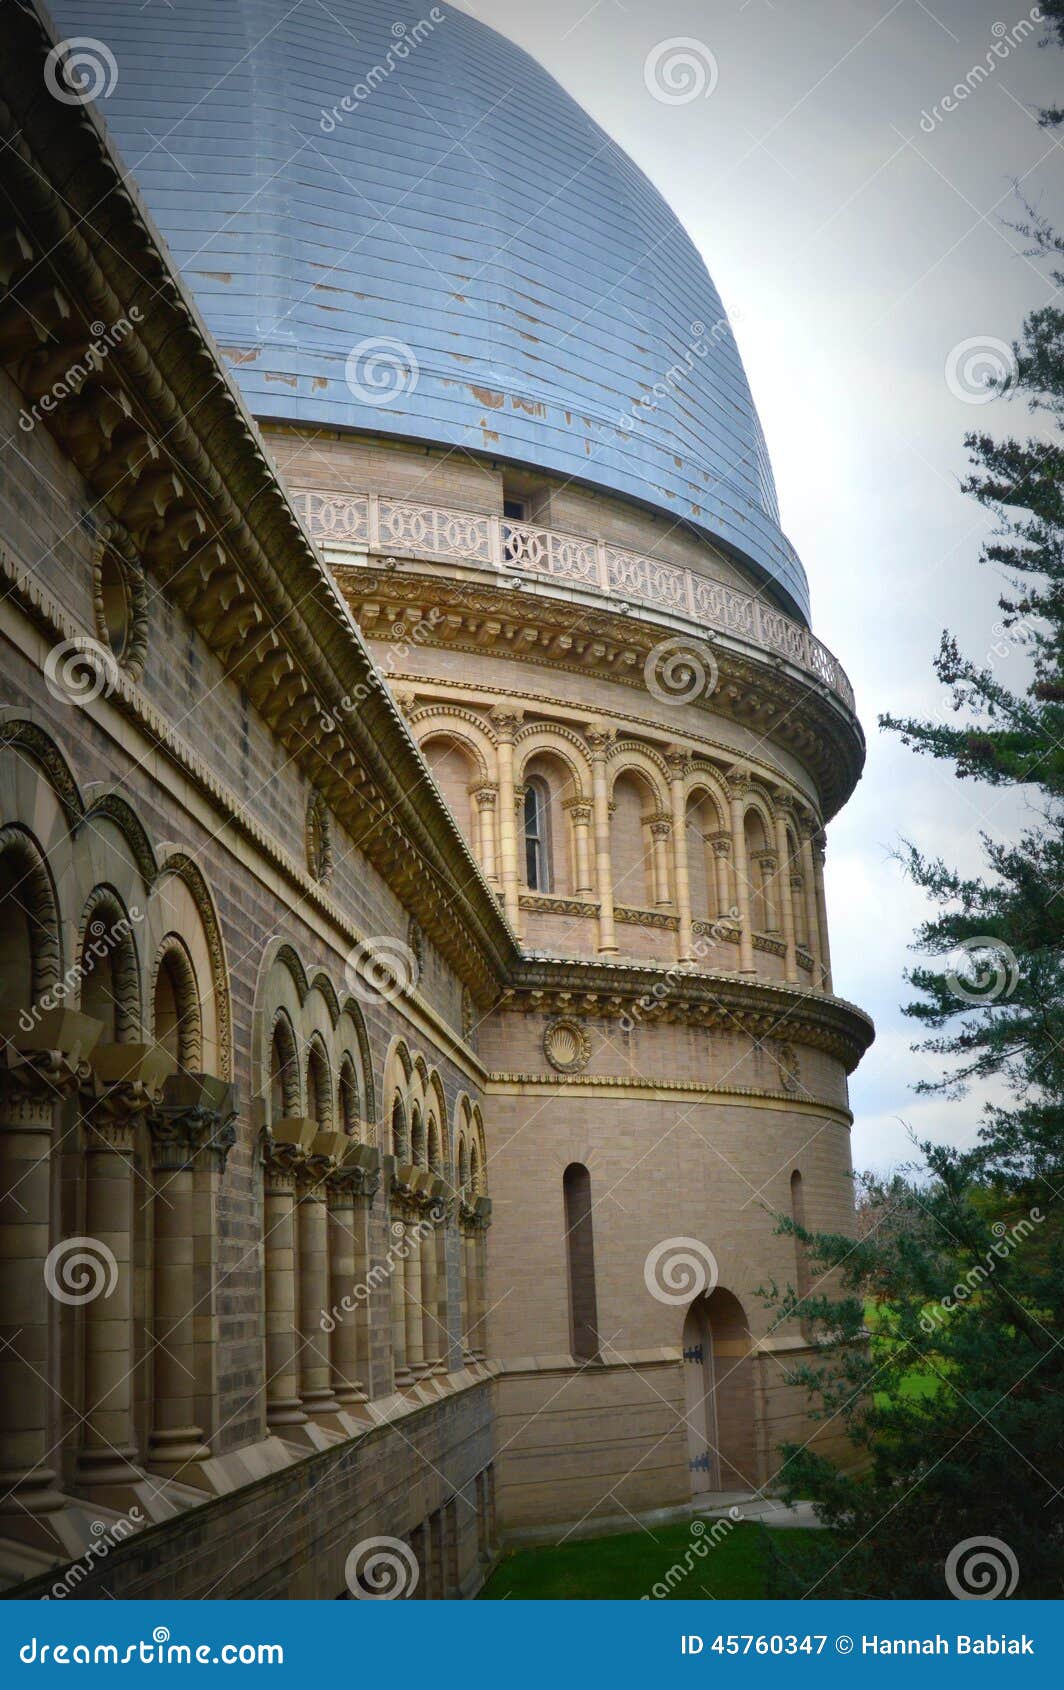 yerkes observatory leading into larger dome